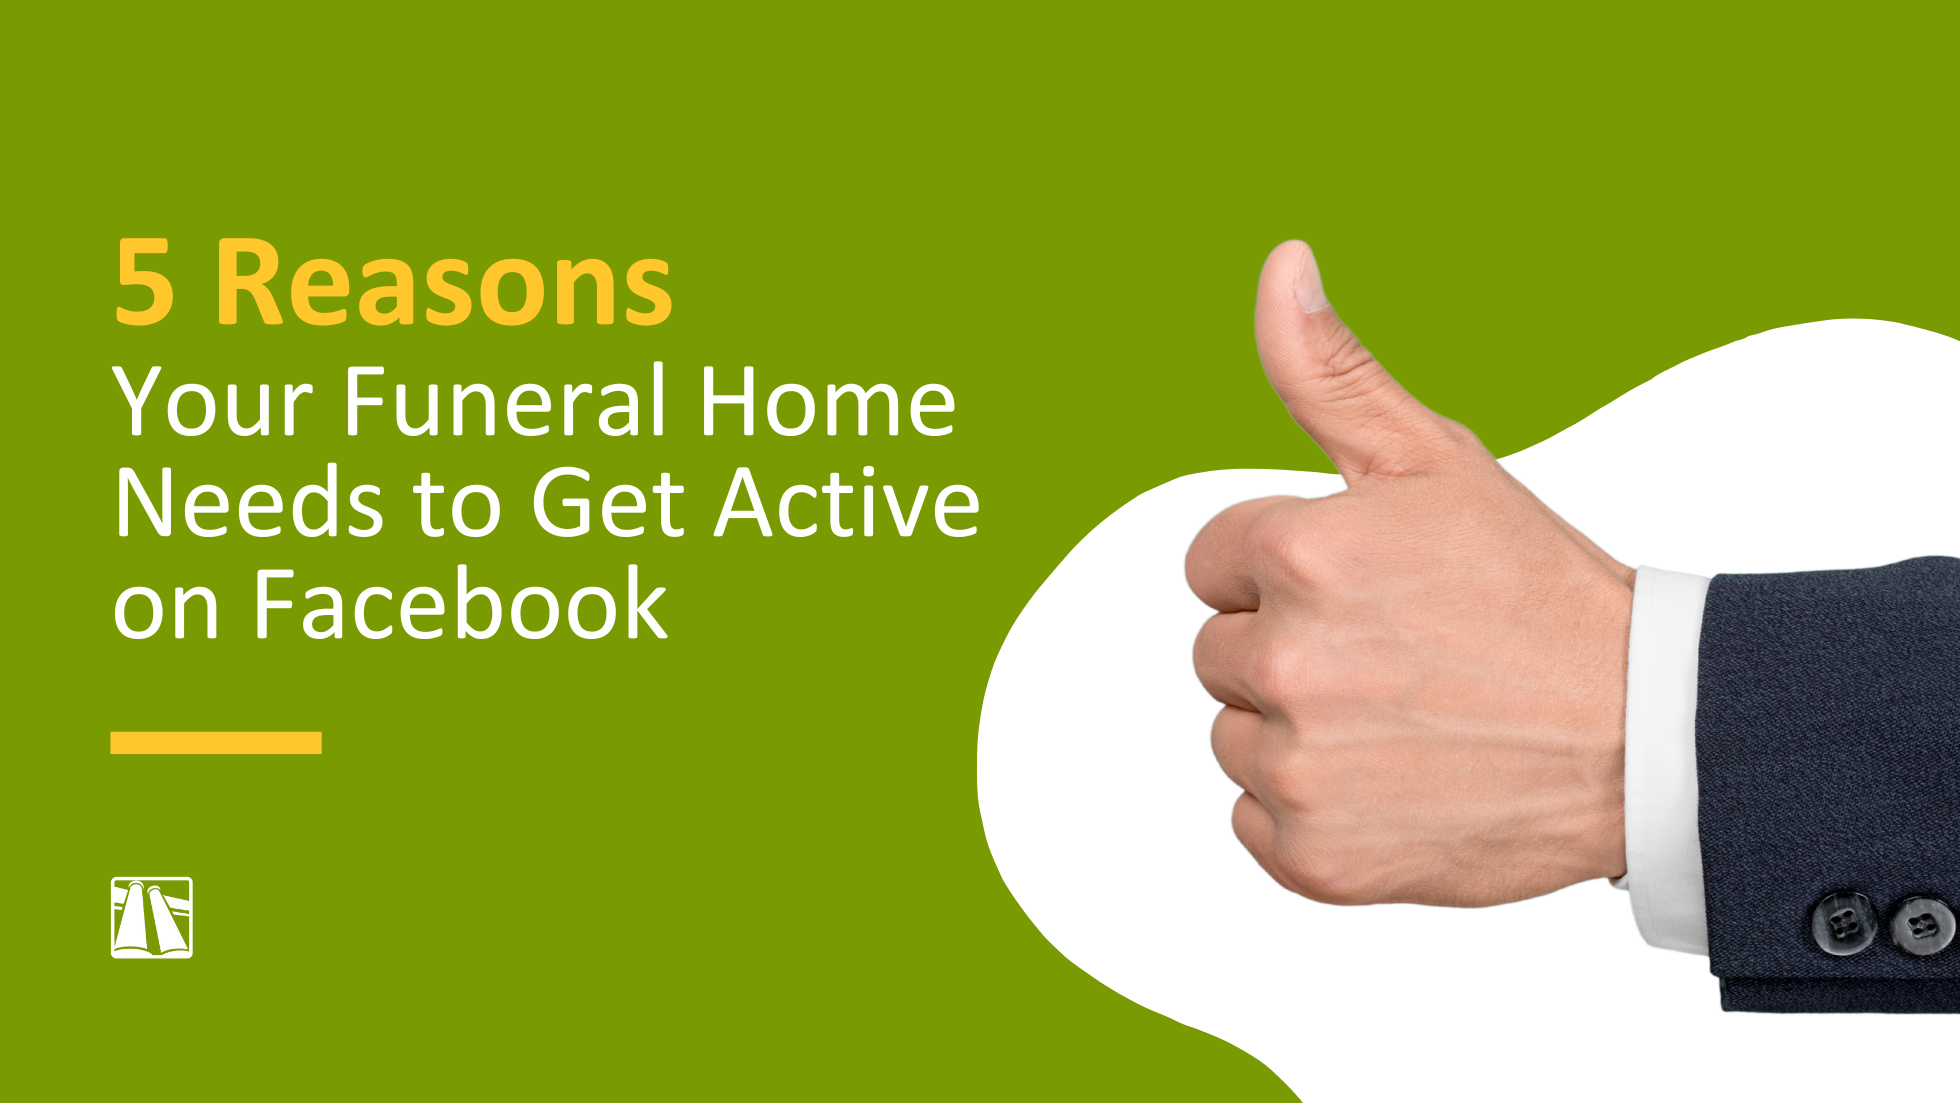 5 reasons to get active on Facebook